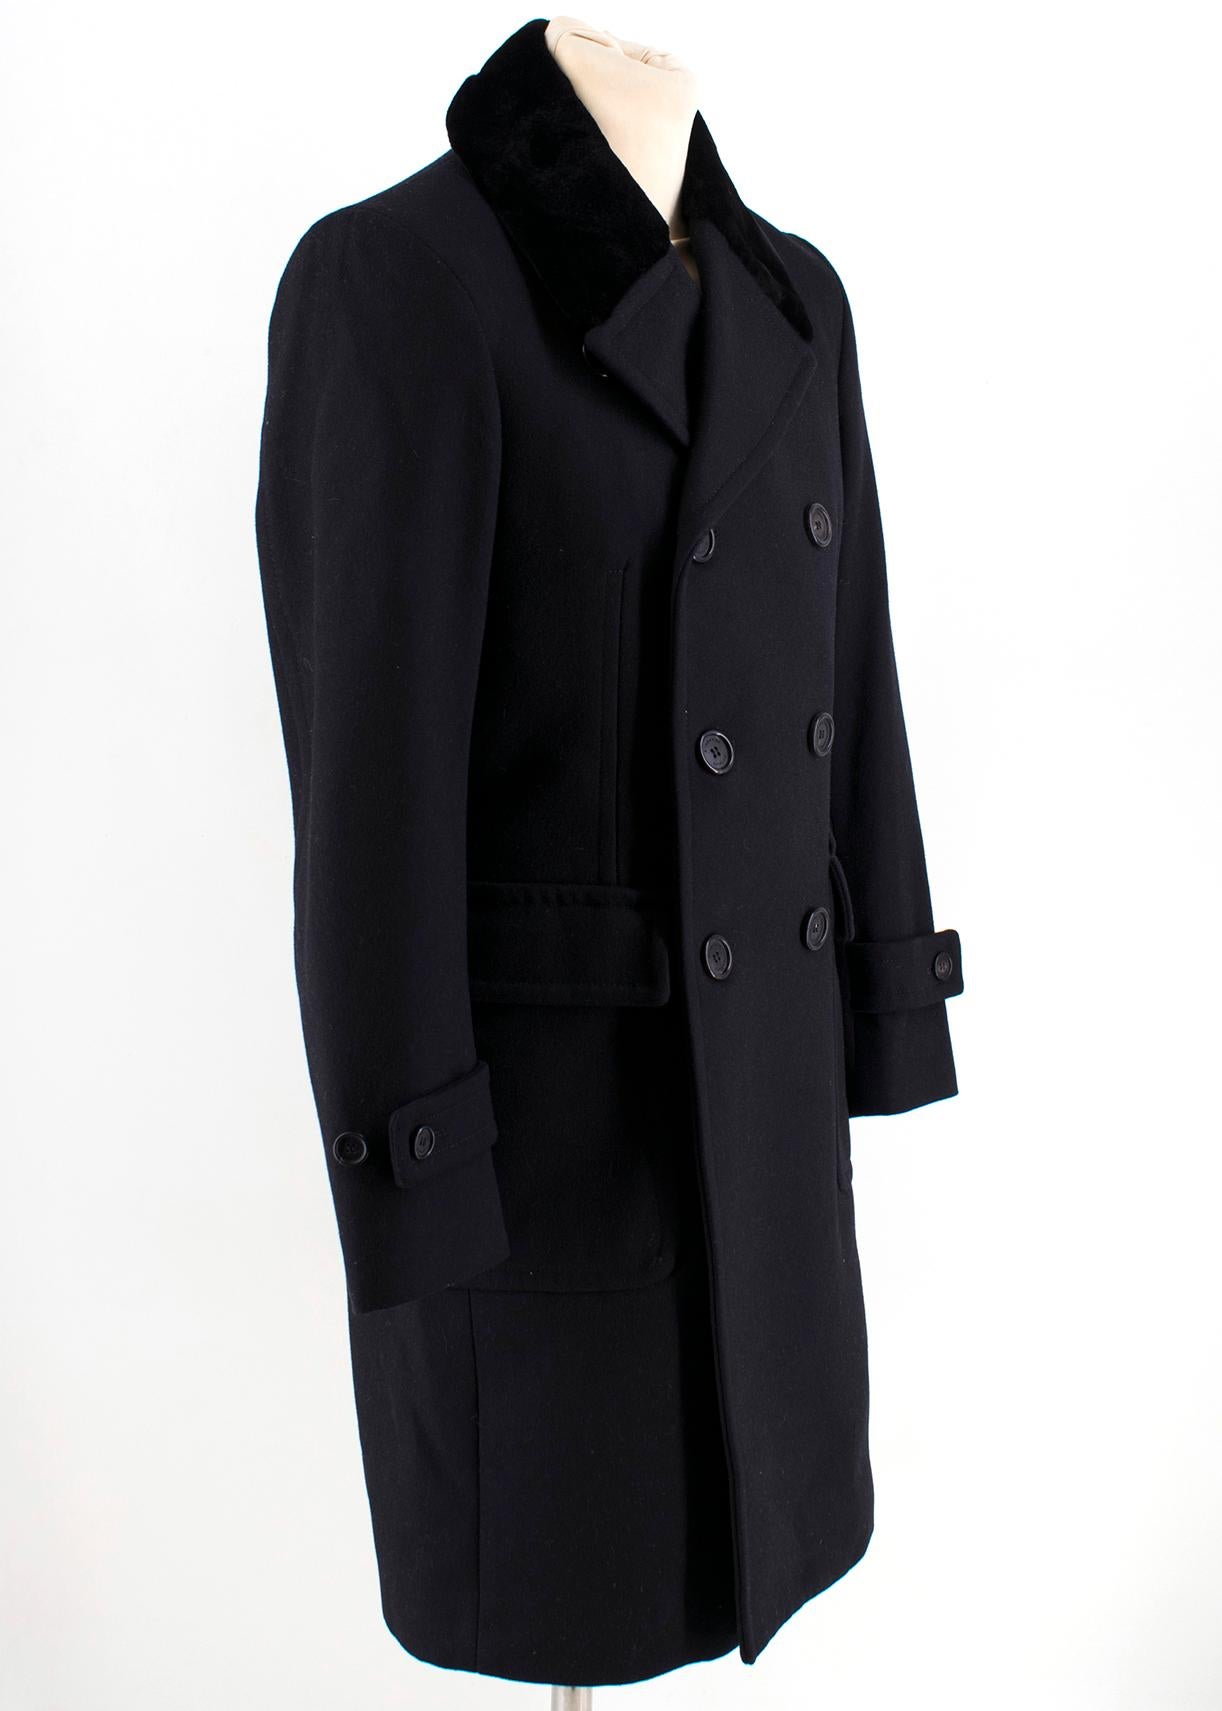 Burberry Wool Black Tailored Coat with Mink Fur Collar

Tailored long coat with a soft fur collar, 
Long sleeves, 
Front centre button fastenings, 
Two front flap pockets,
Back button-through vent,
Rear belt with button fastenings,
Mid-weight
80%